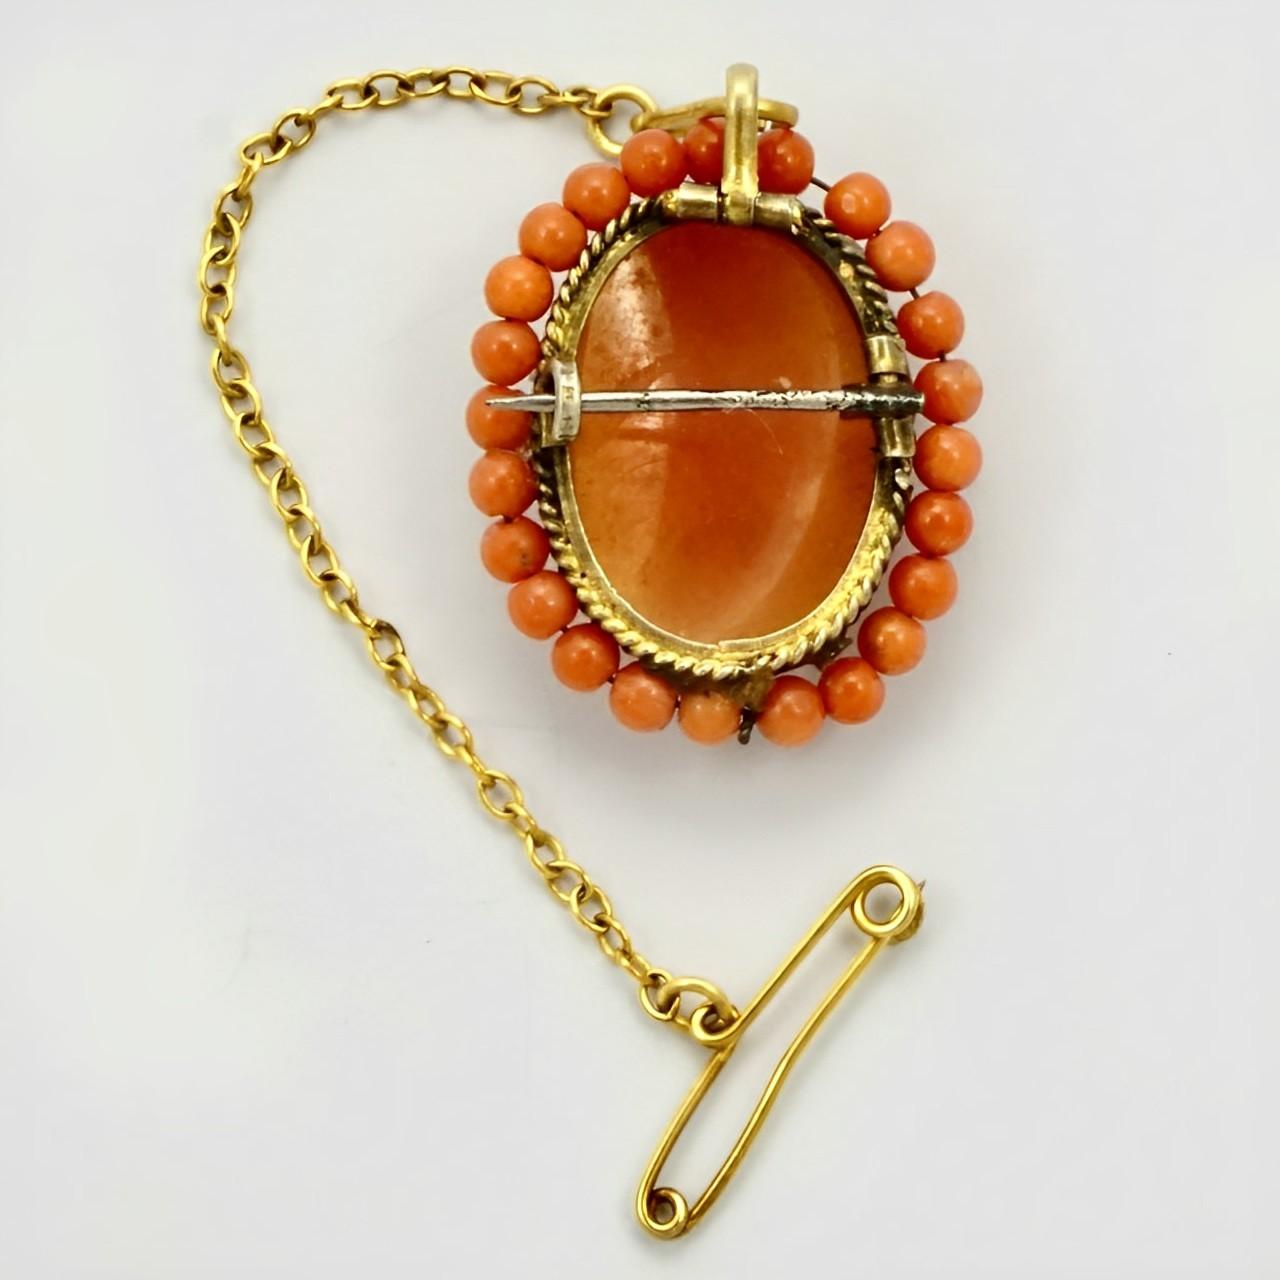 Beautiful gold plated shell cameo brooch, with rope twist detail and a coral bead surround. It has a safety chain. Measuring length 2.4 cm / .94 inch by width 2 cm / .78 inch. There is wear to the gold plating. The coral beads are on wire and